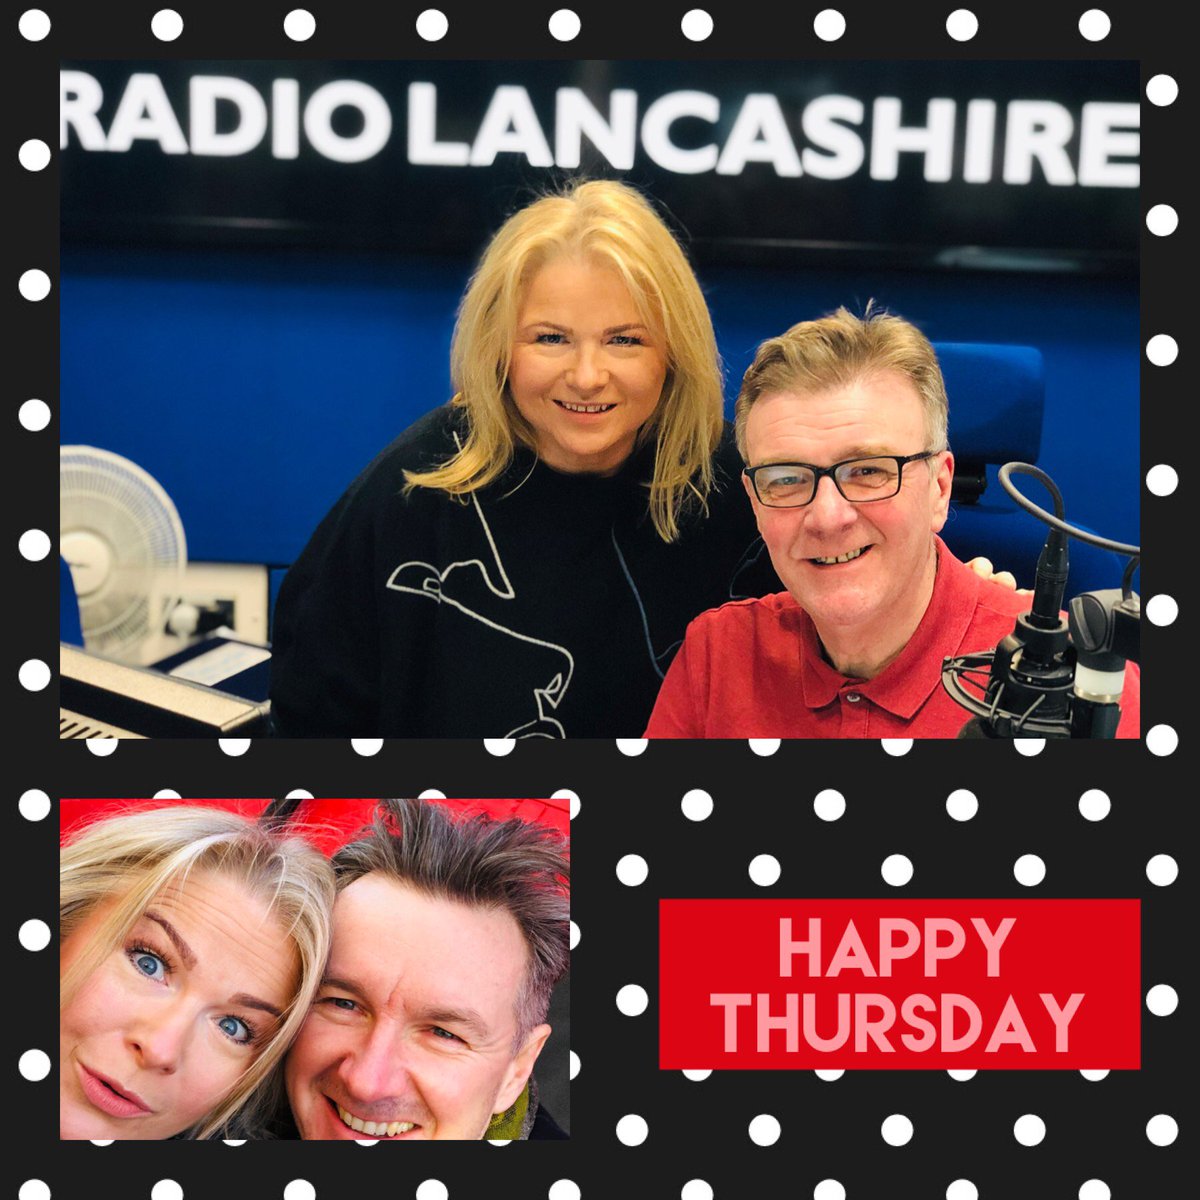 A lovely time in the studio today @BBCLancashire with @Gillylancs and even got to see @superquint! Happy Thursday everyone!